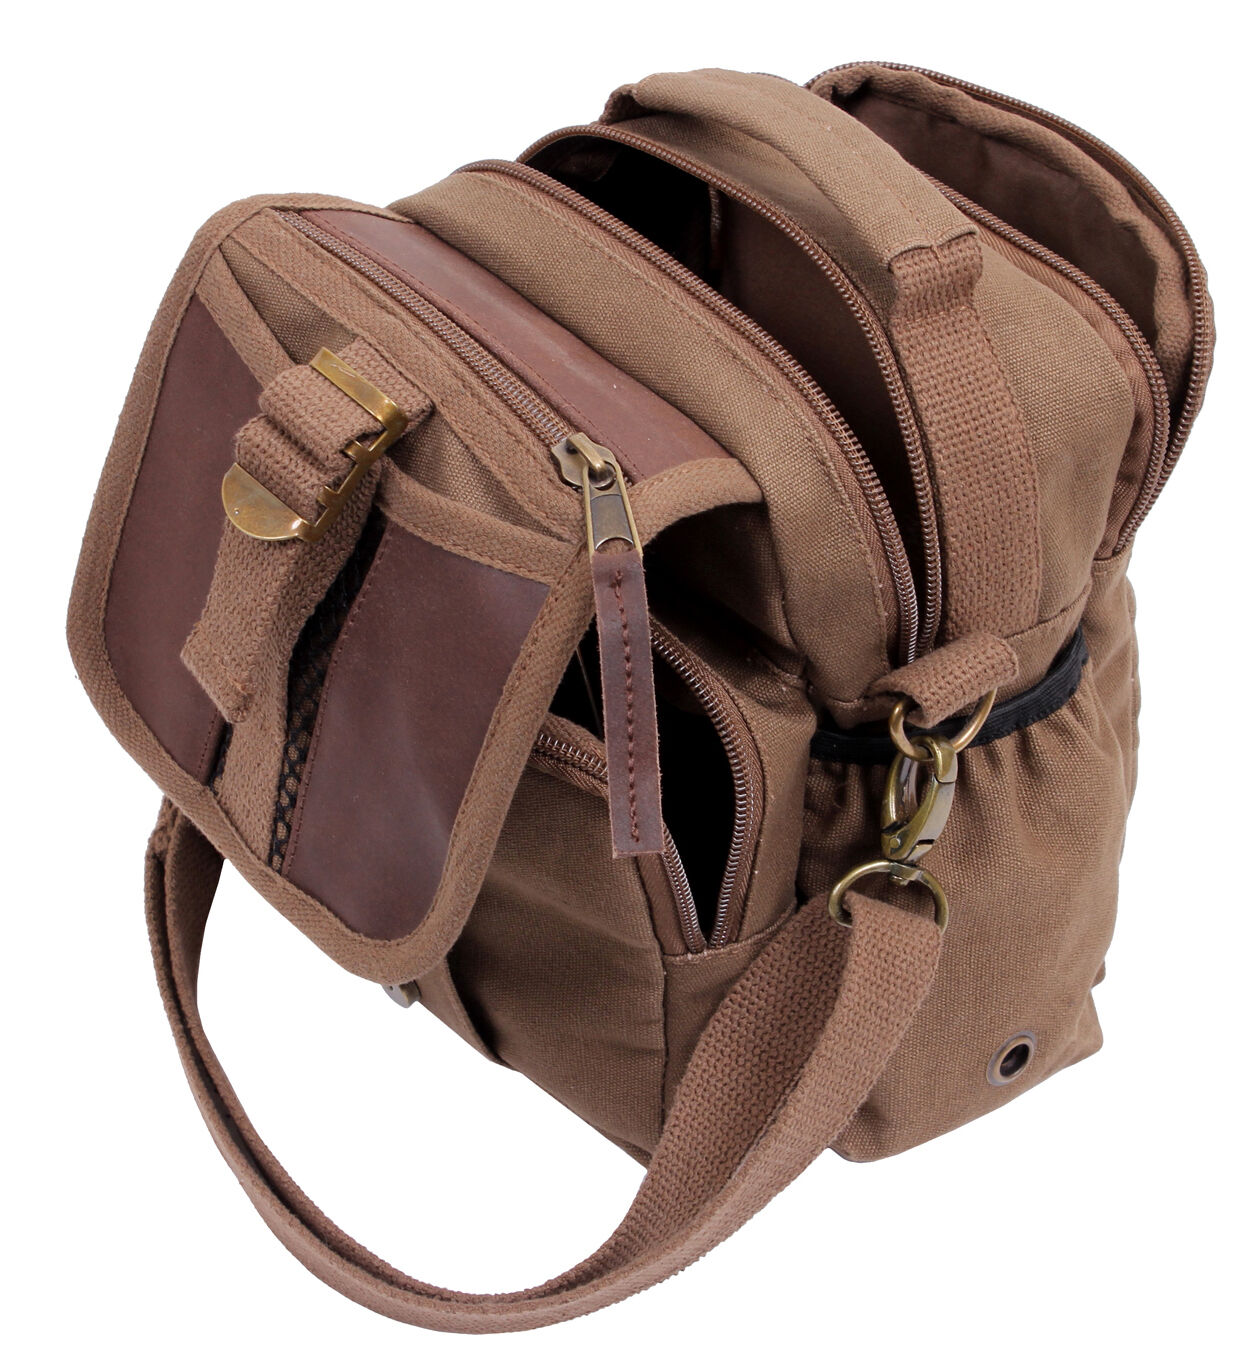 Rothco Canvas Map Case Shoulder Bag - Earth Brown